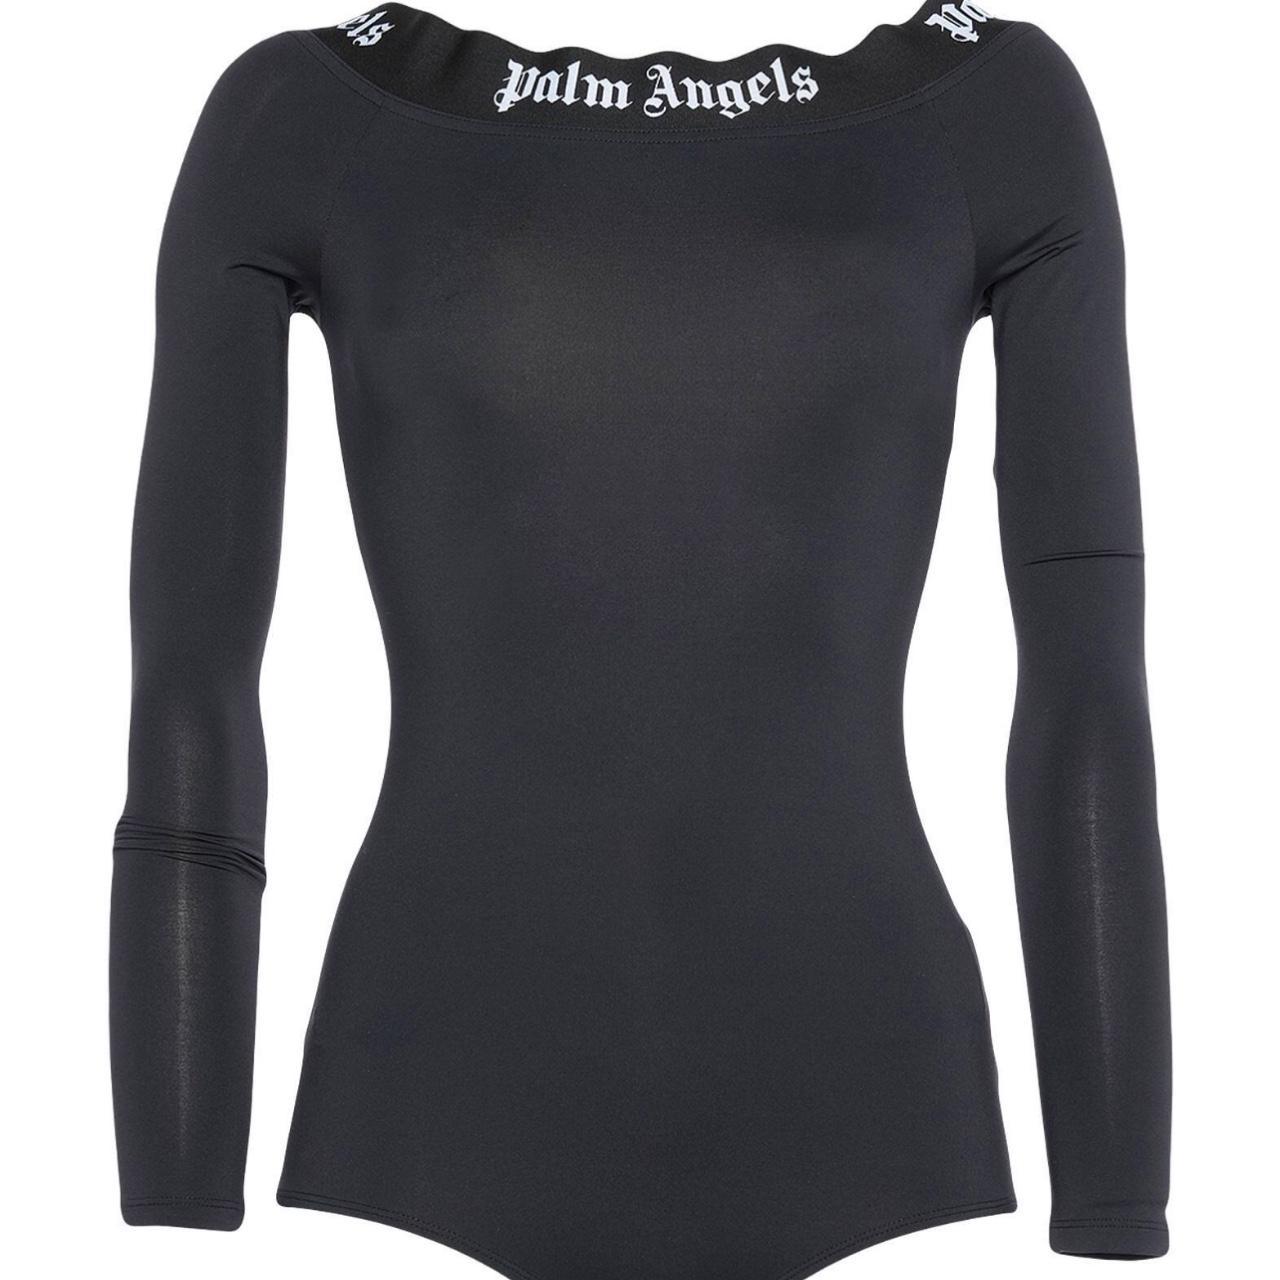 Palm Angels Women's Black and White Bodysuit (2)